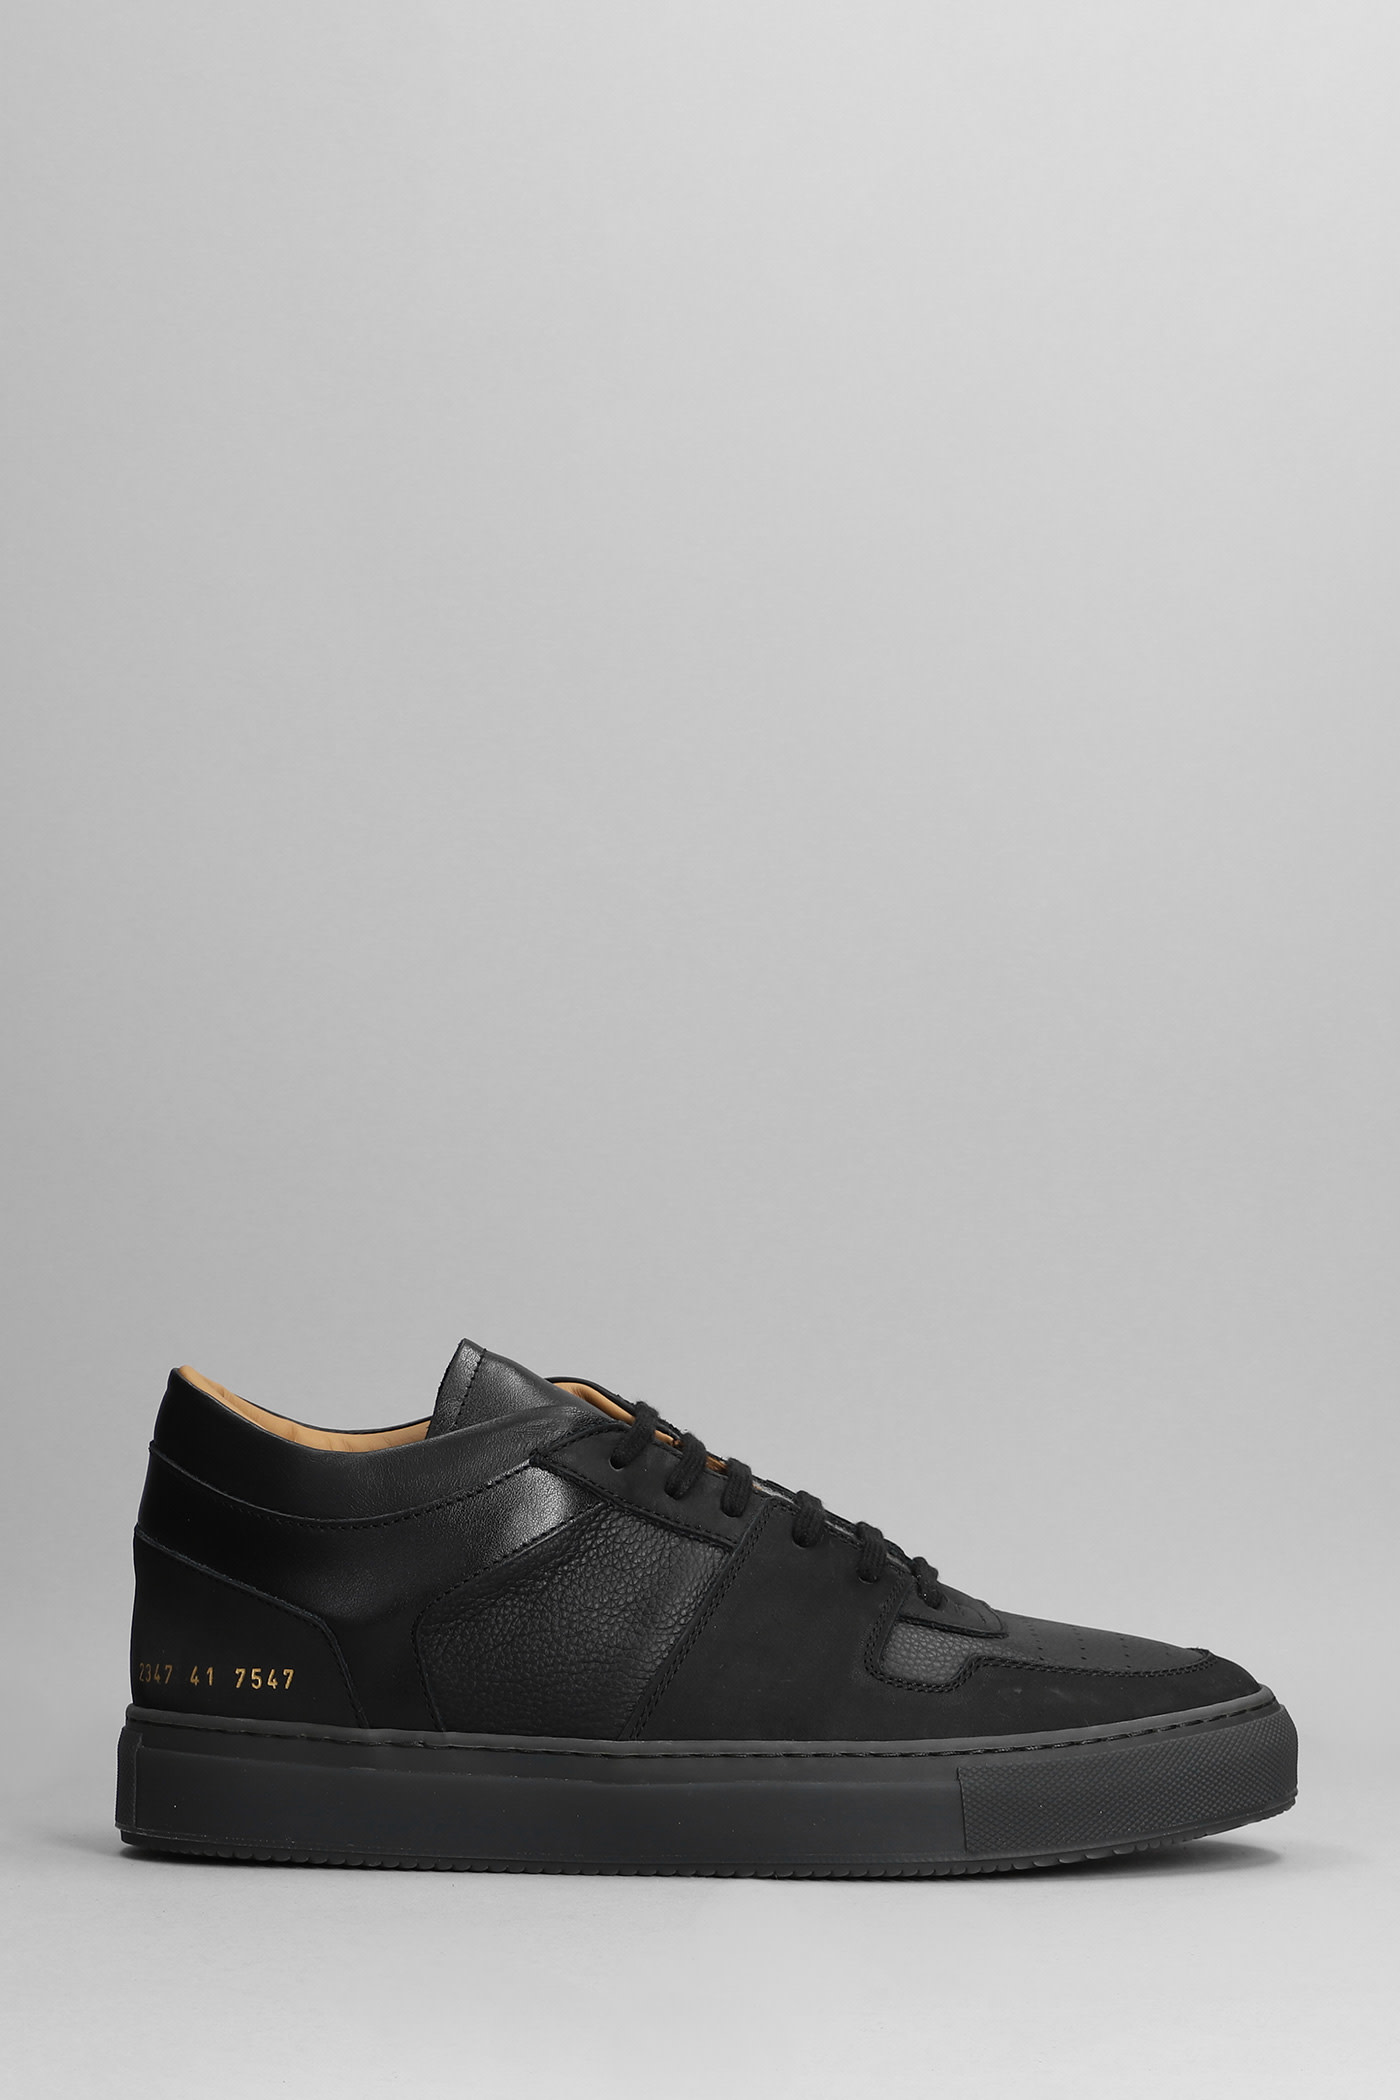 Common Projects Decades Sneakers In Black Suede And Leather